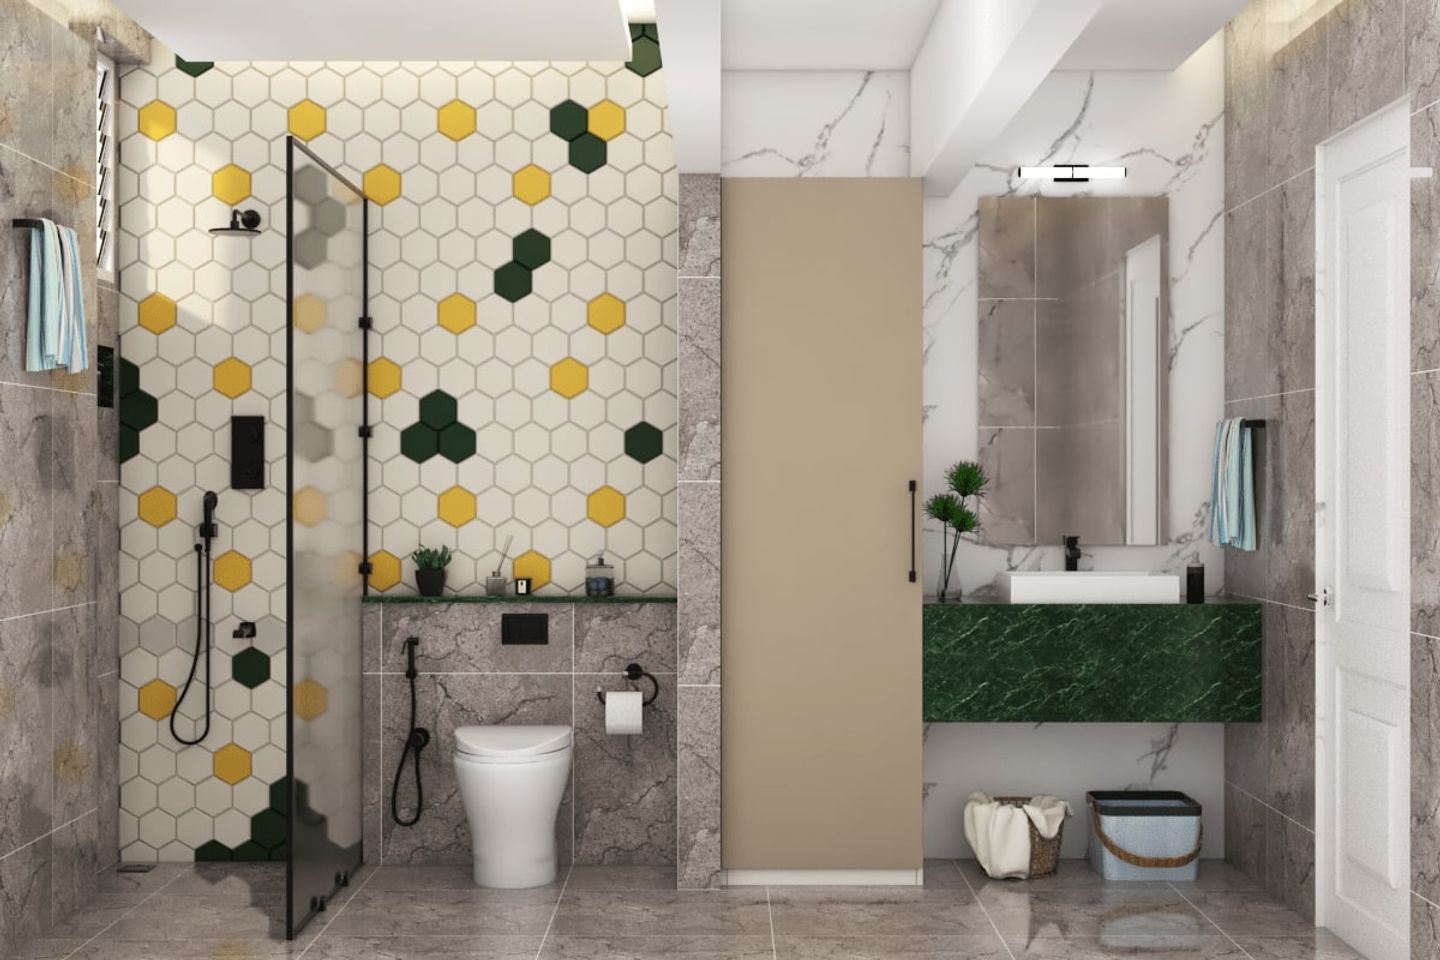 Spacious Bathroom Design With Hexagonal Tiles And Green Marble Finishes ...